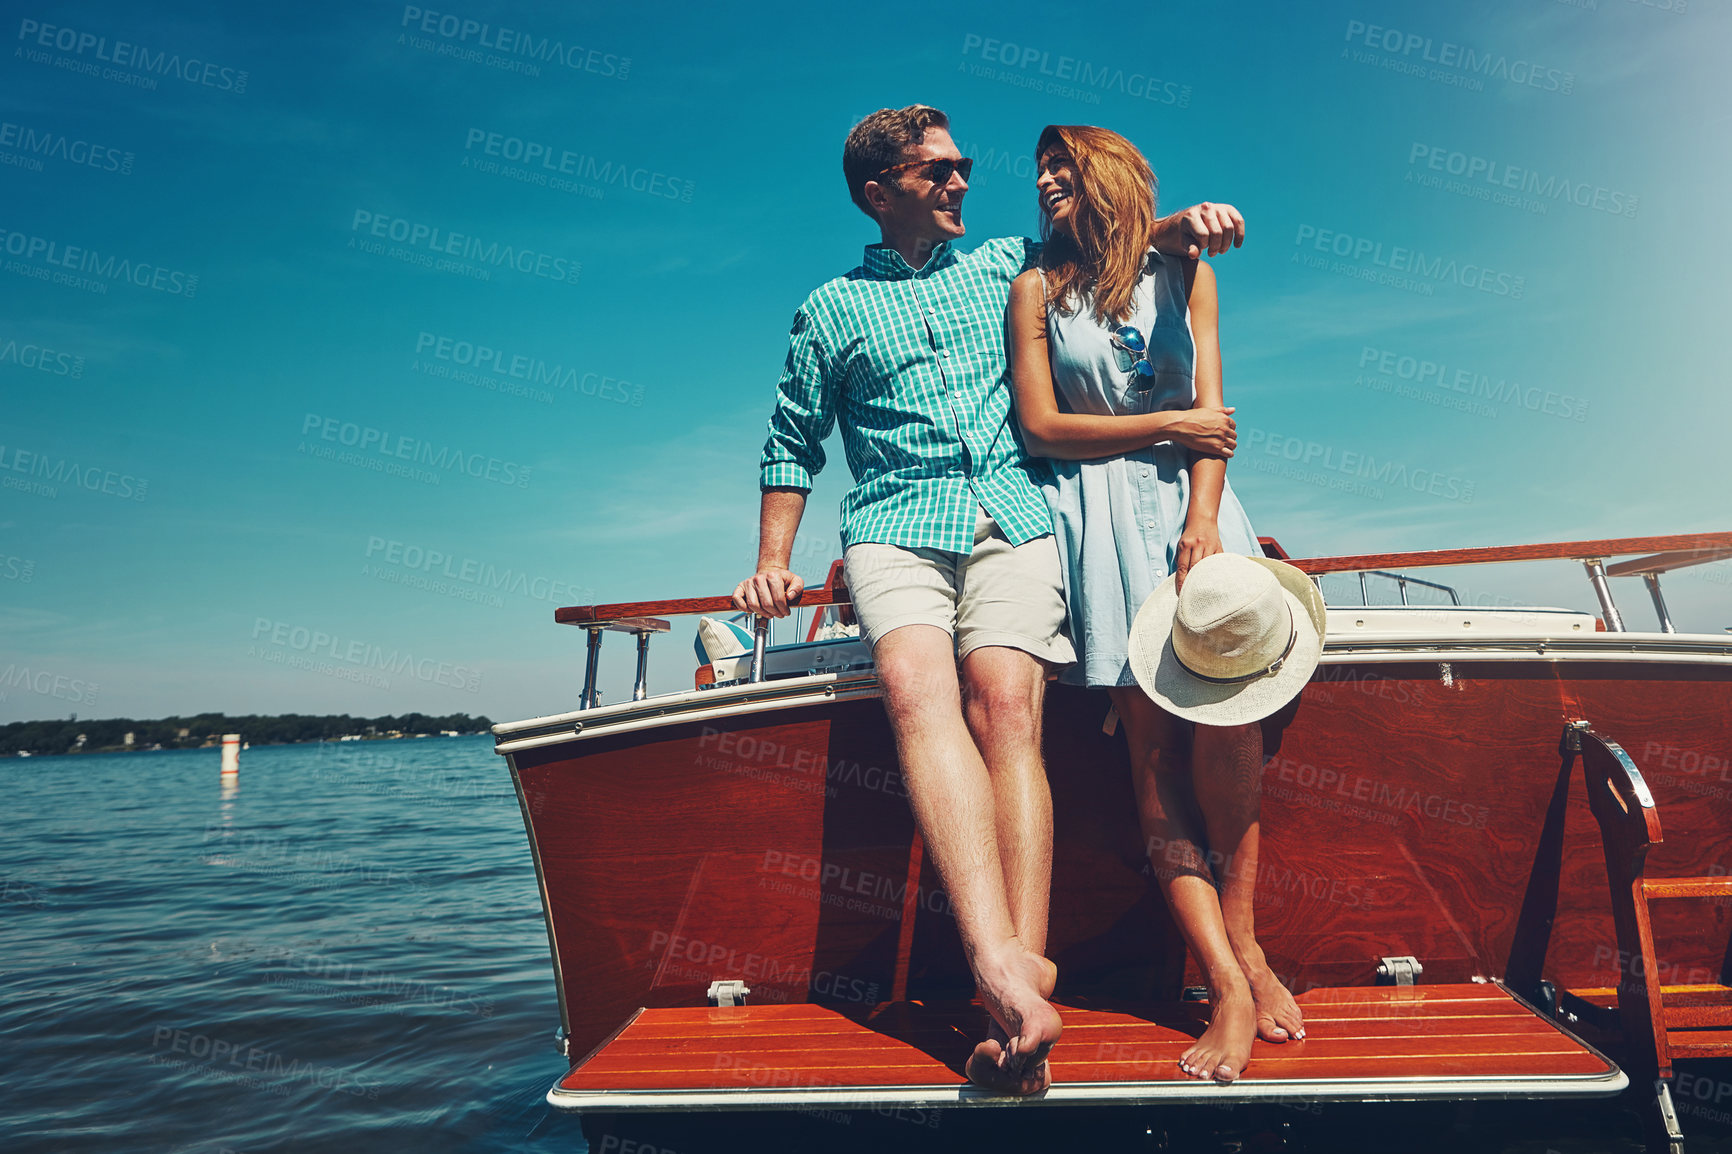 Buy stock photo Shot of a young couple spending time together on a yacht